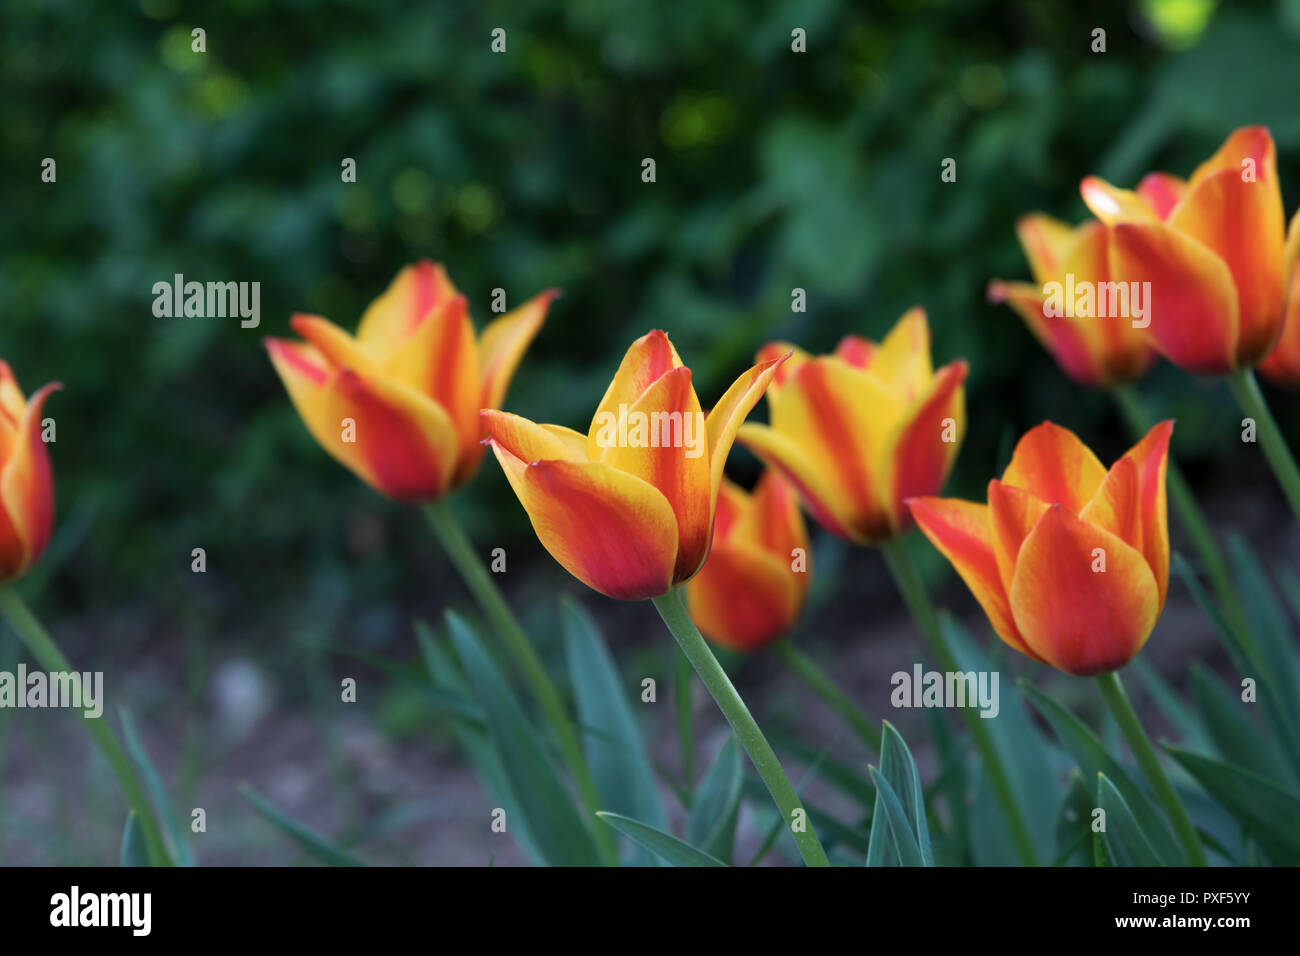 Tulips in red and yellow Stock Photo